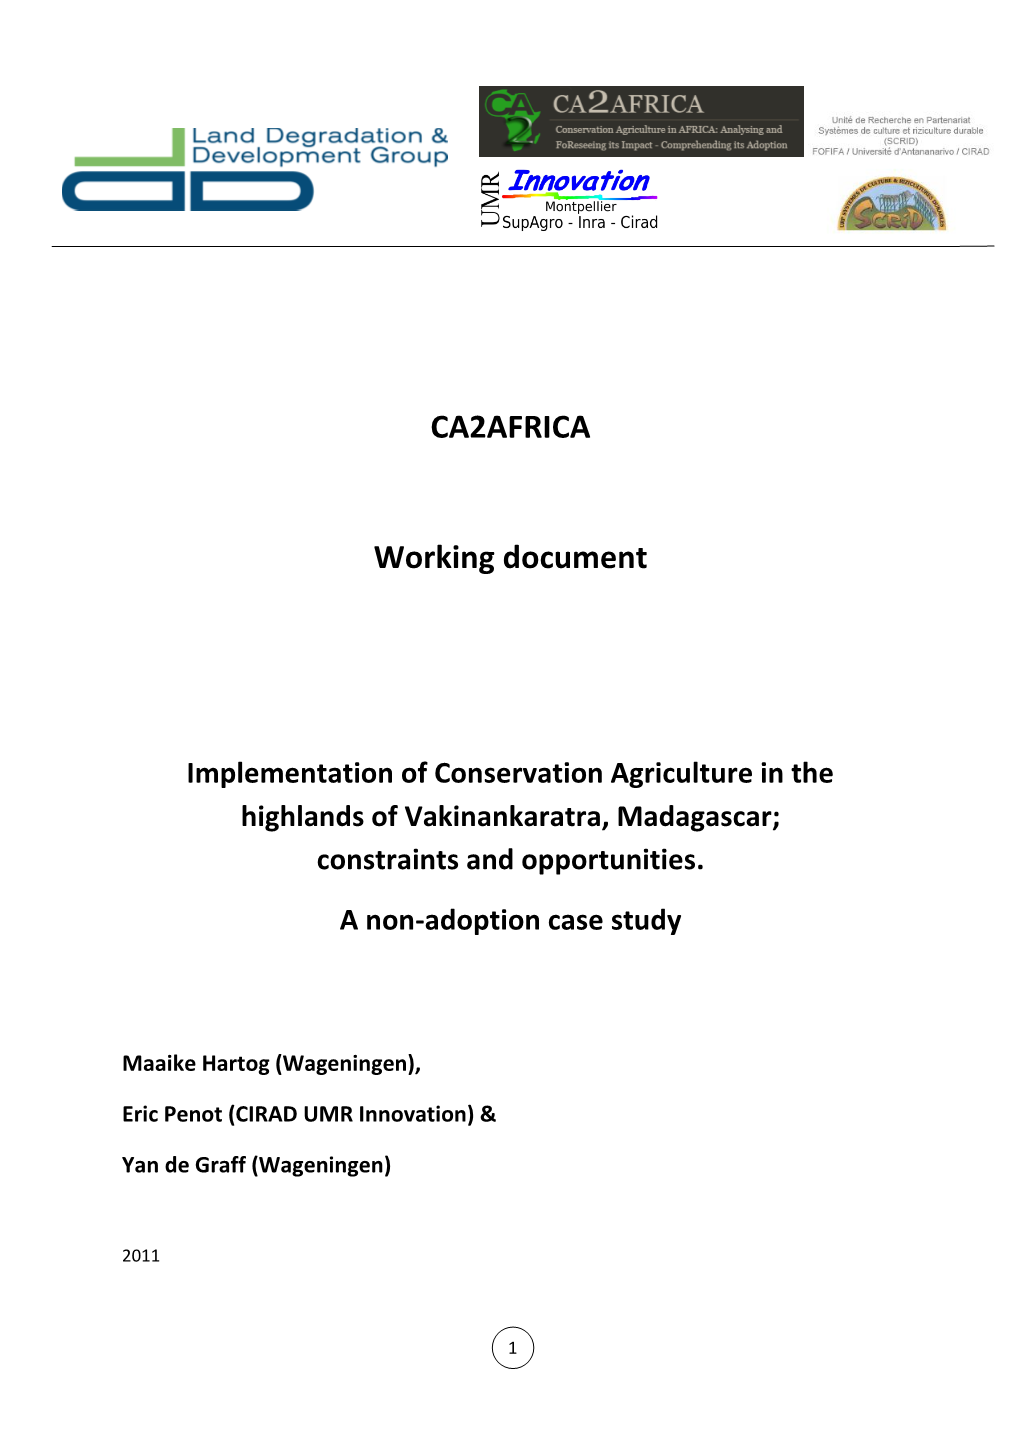 CA2AFRICA Working Document Implementation Of